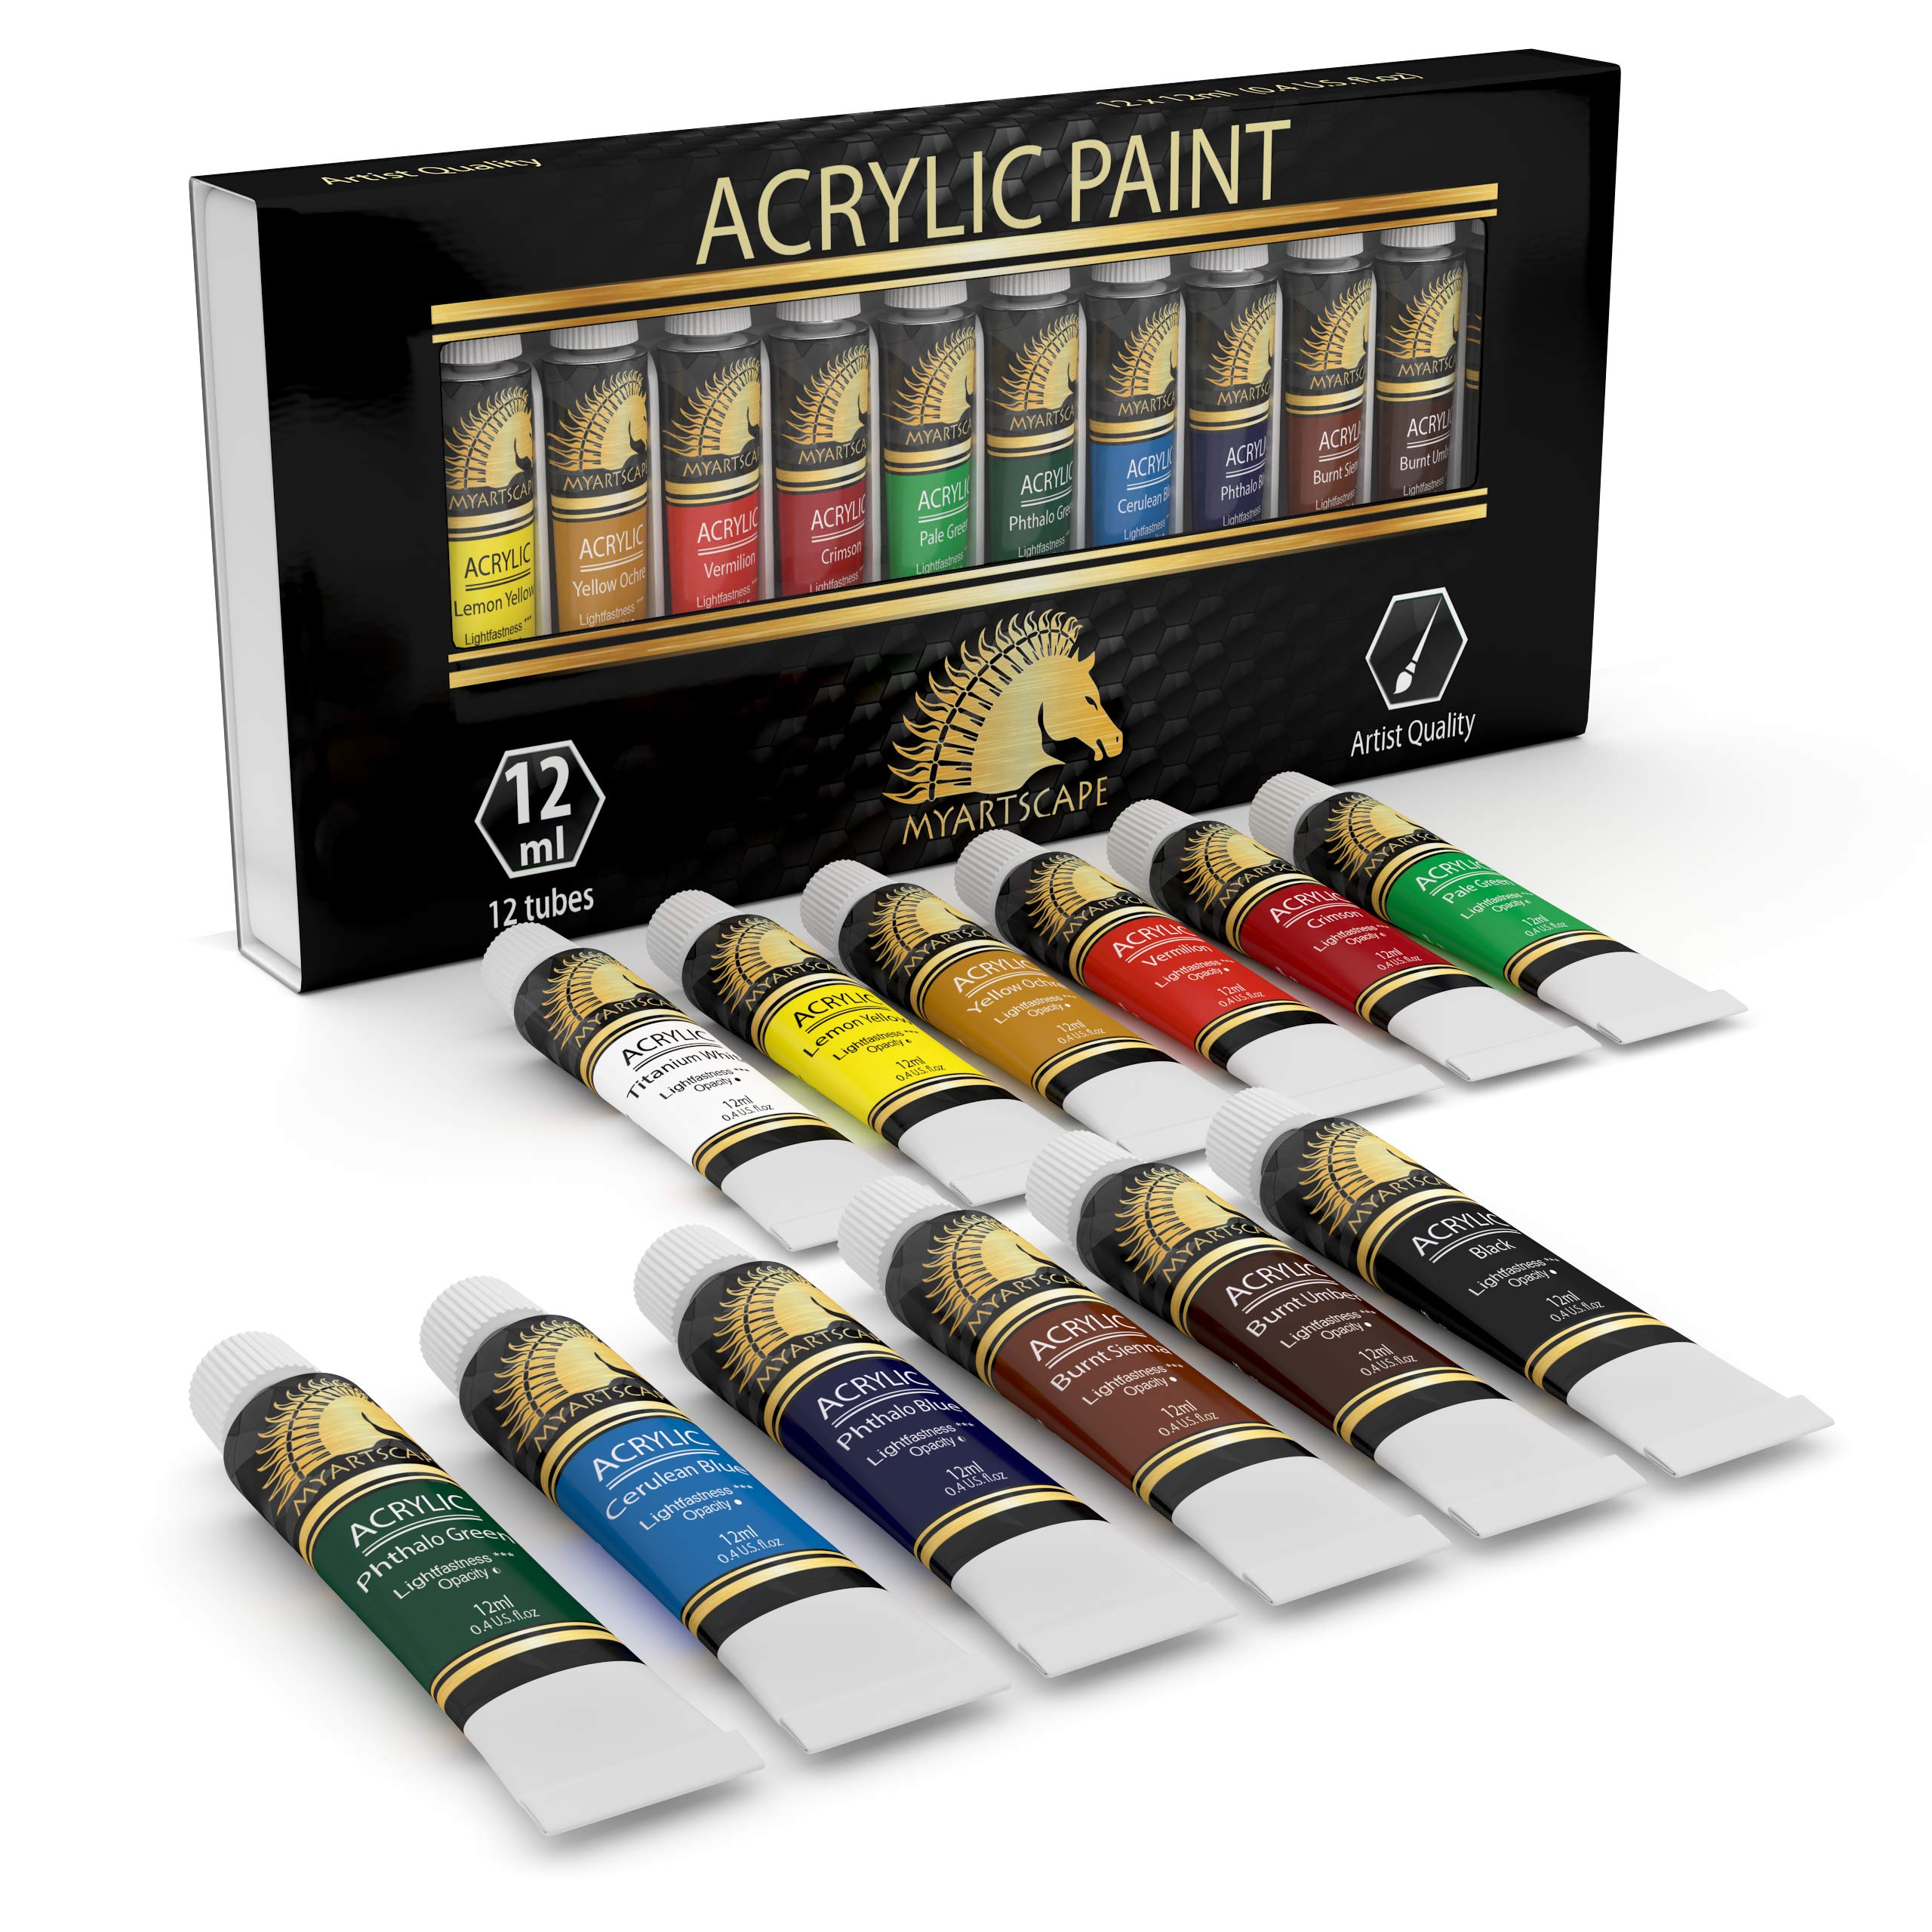 Acrylic Paint Set – A Perfect Gift